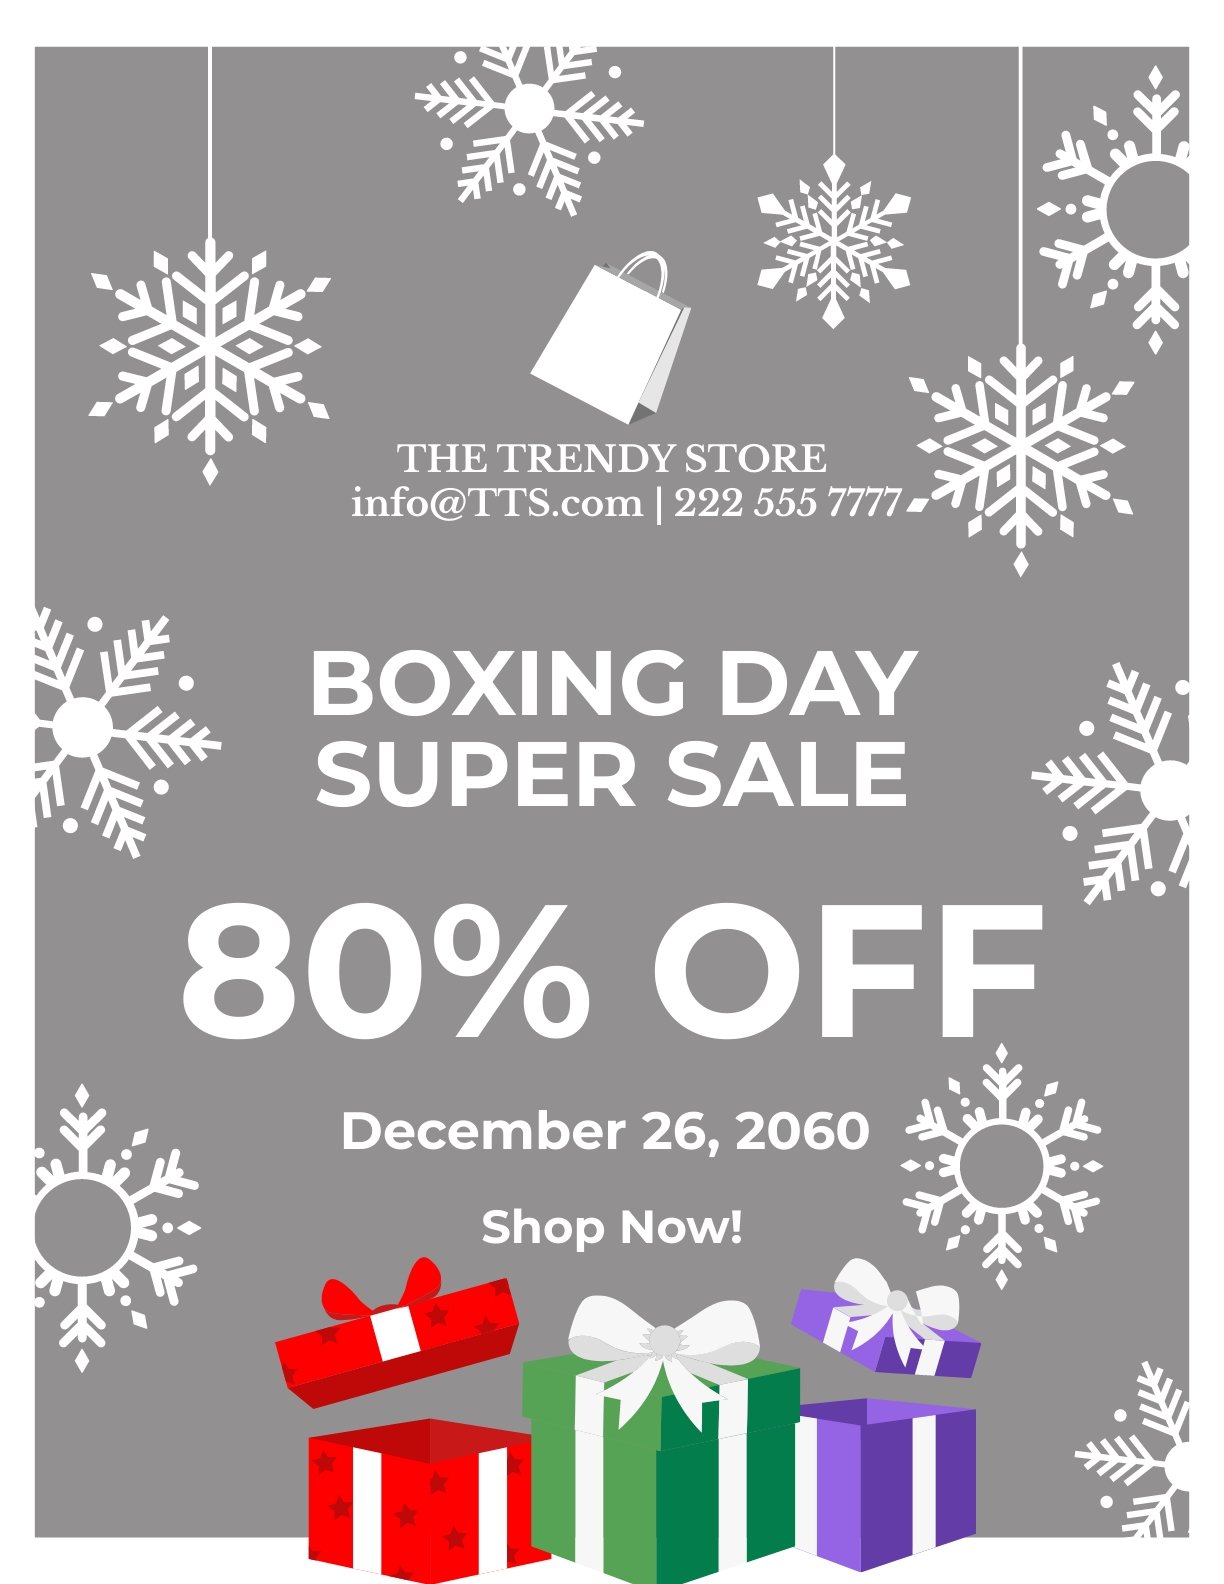 Free Boxing Day Advertising Flyer in Word, Google Docs, Illustrator, PSD, EPS, JPG, PNG